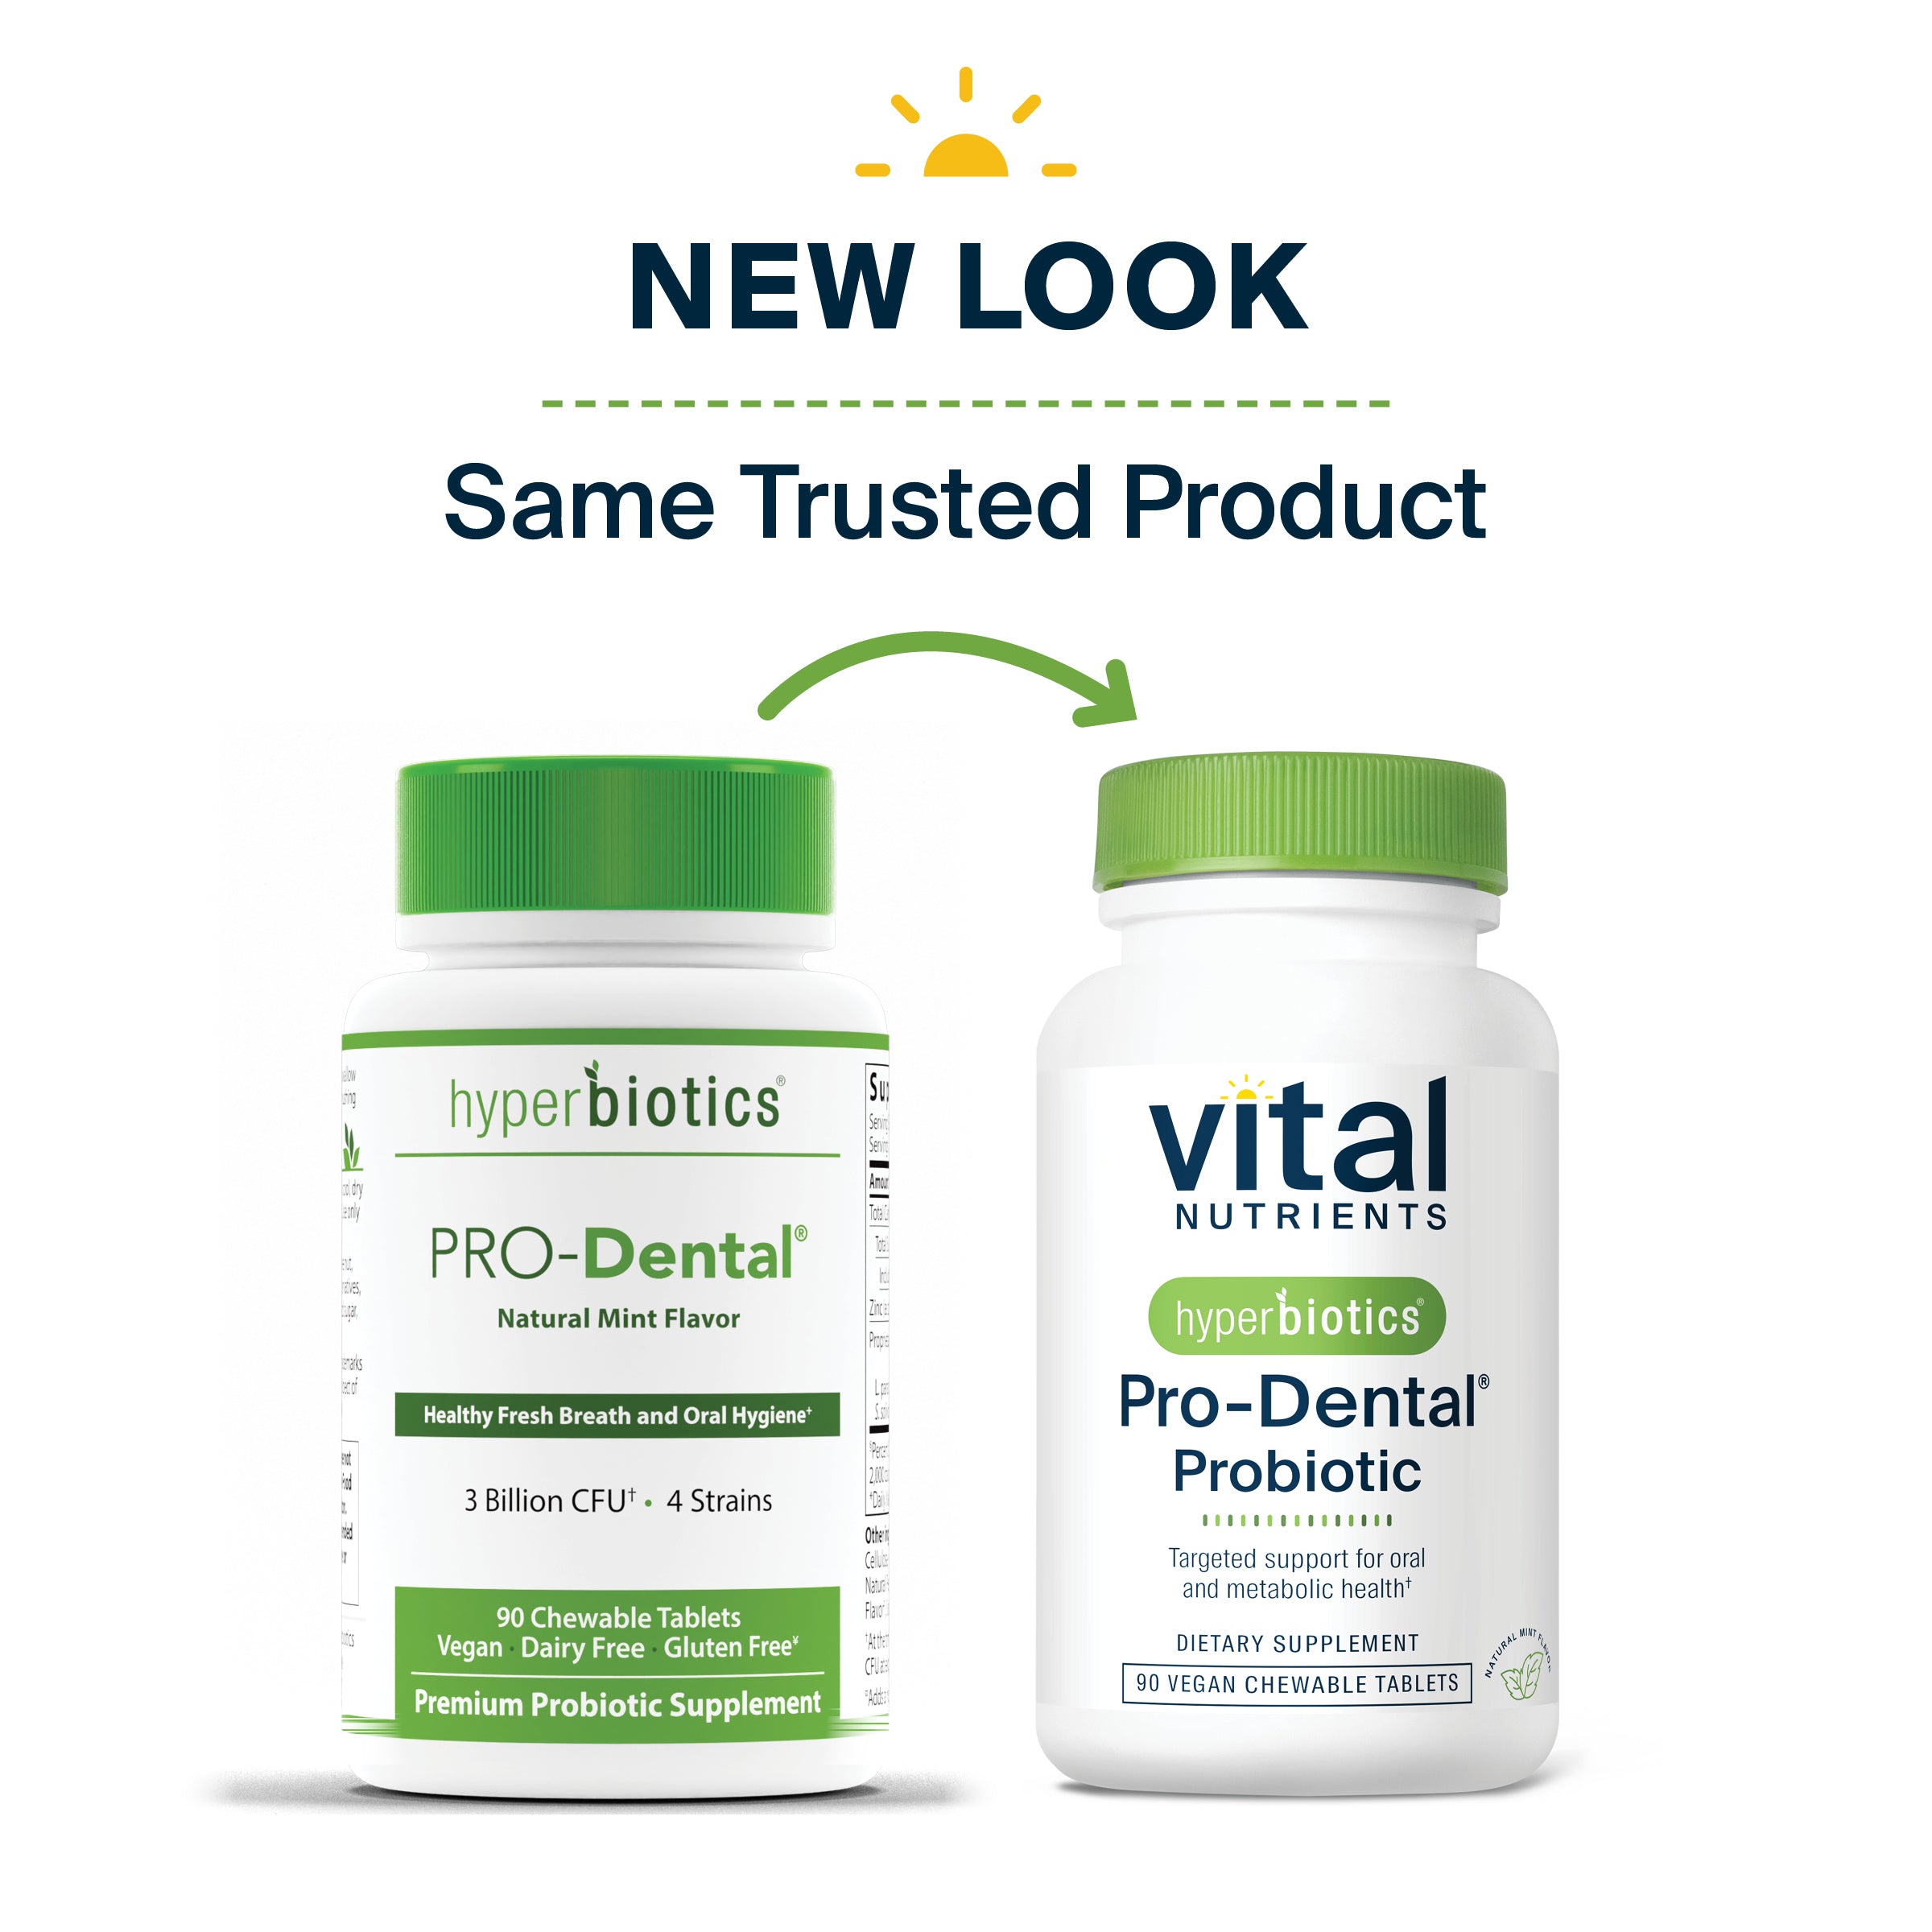 Hyperbiotics Pro-Dental Probiotic 90 chewable tablets new look, same trusted product.